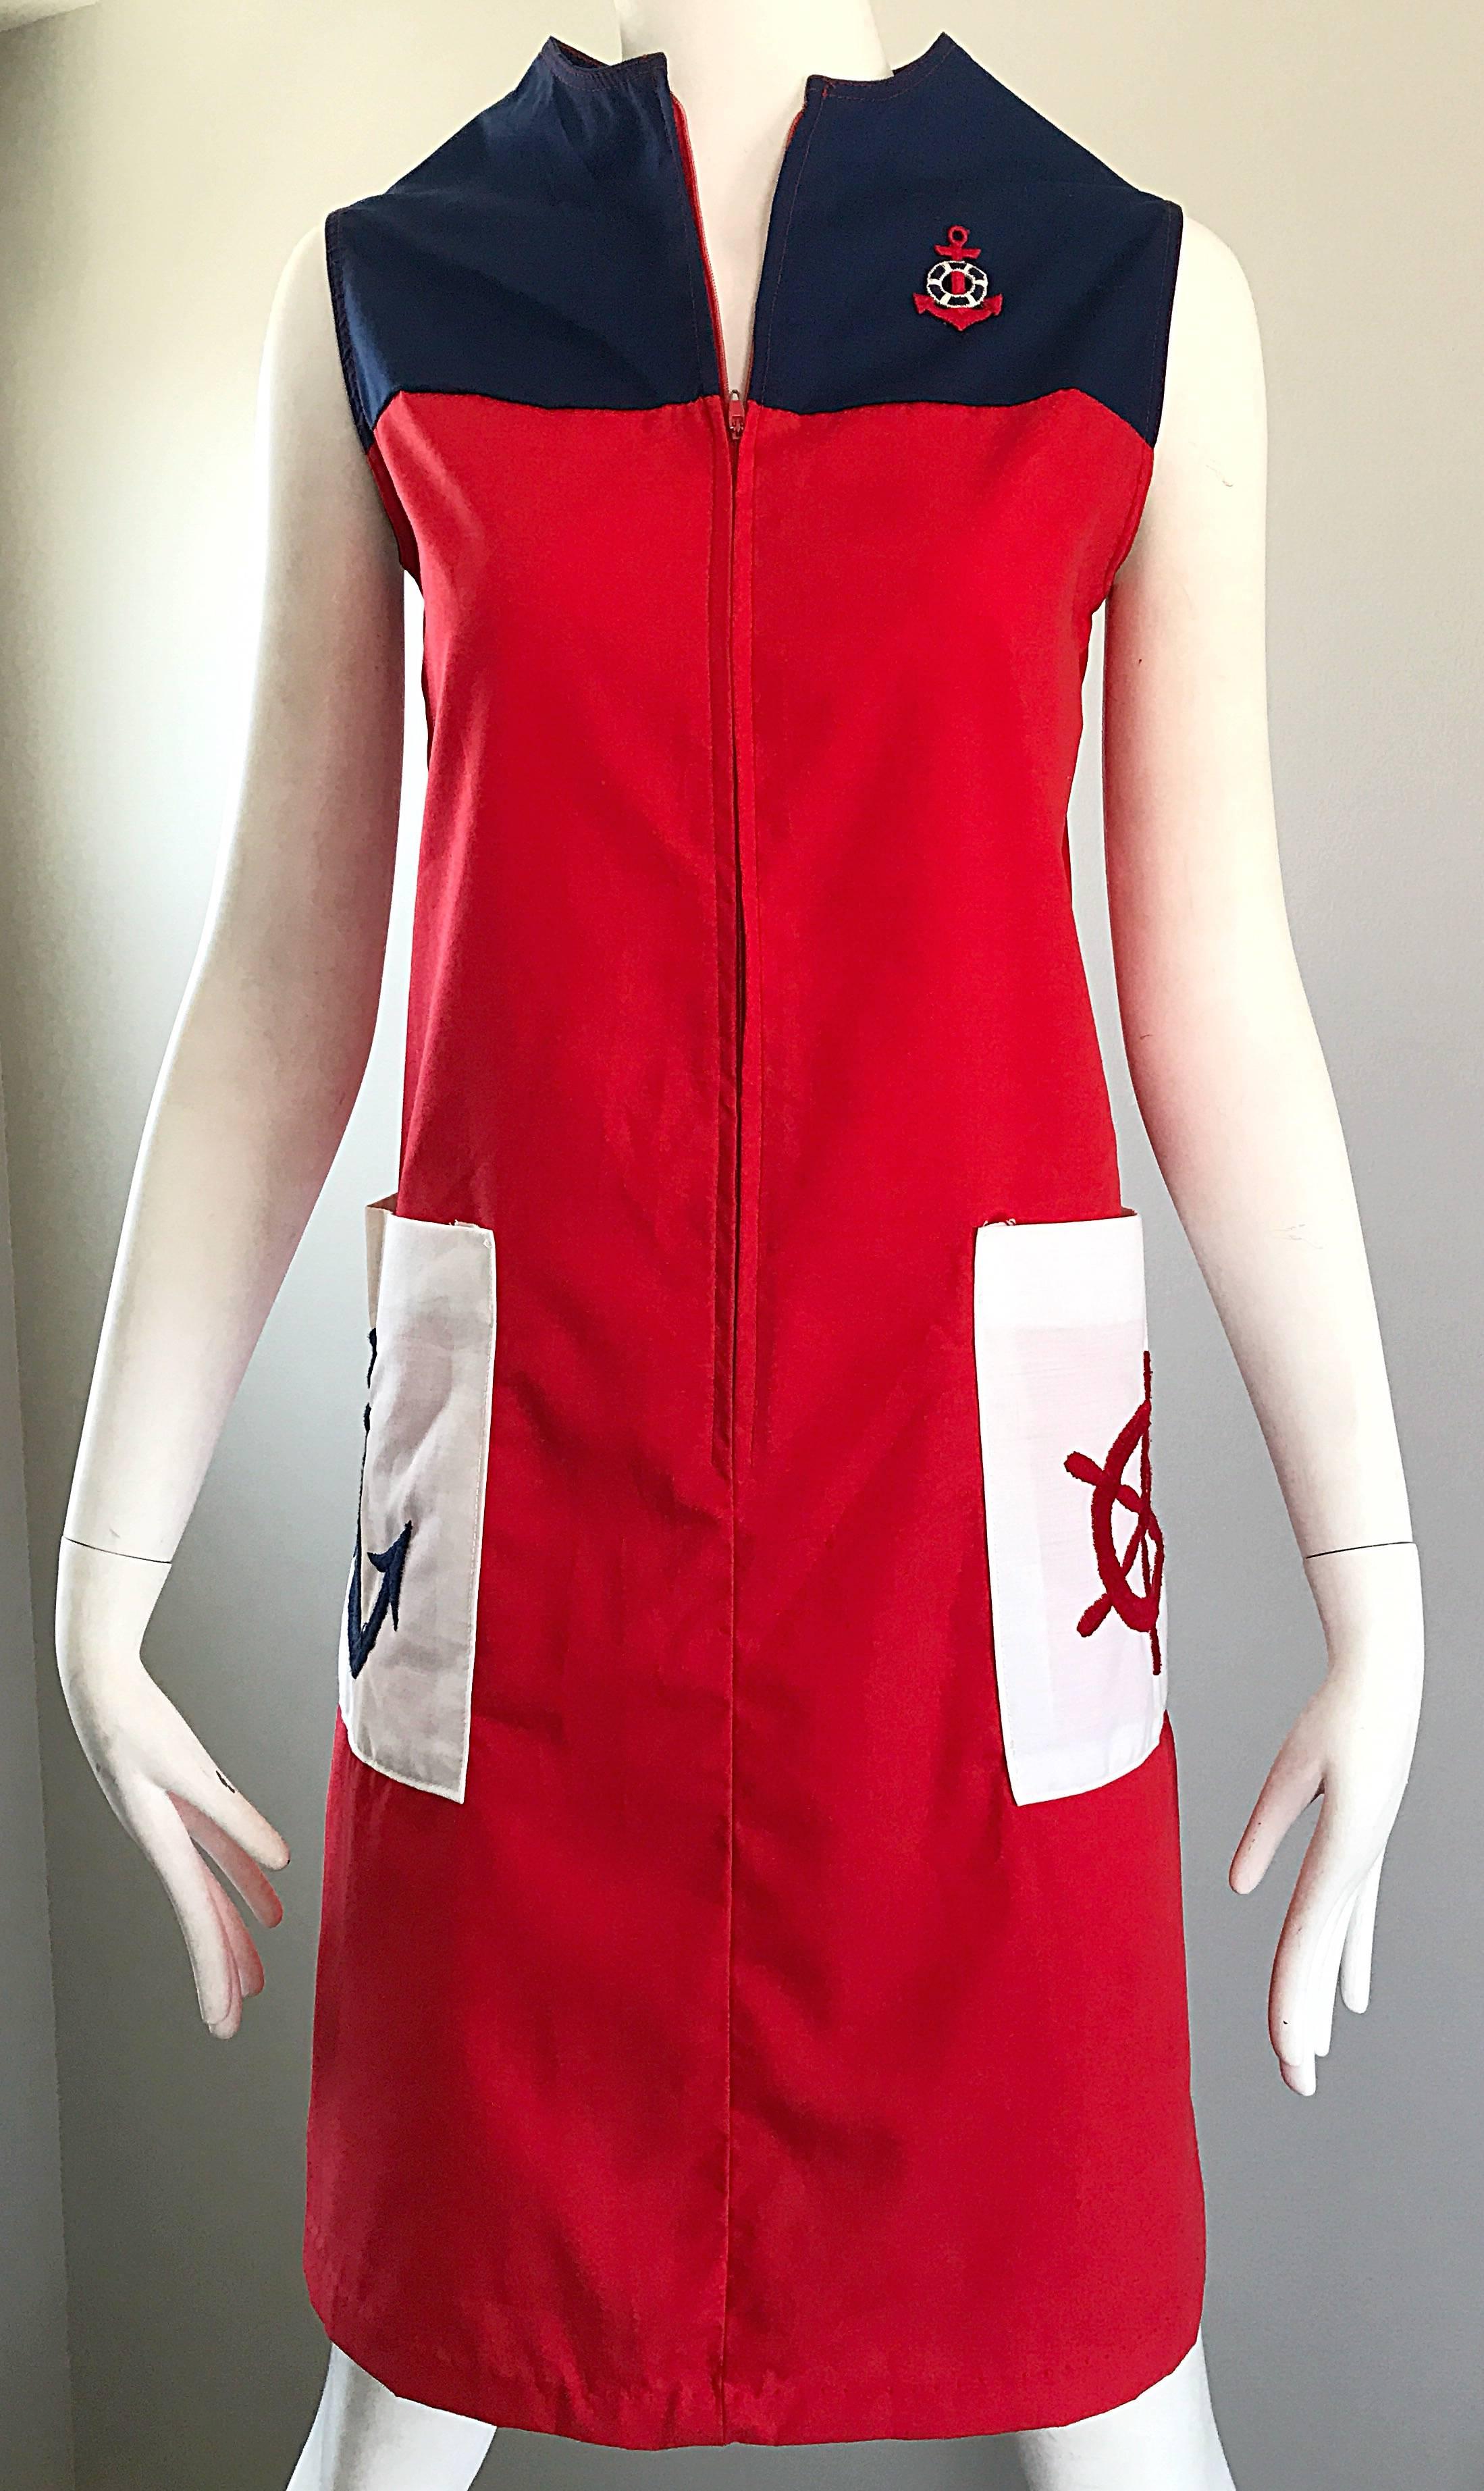 Women's Chic 1960s Red, White and Navy Blue Nautical Sailor Vintage 60s A Line Dress 